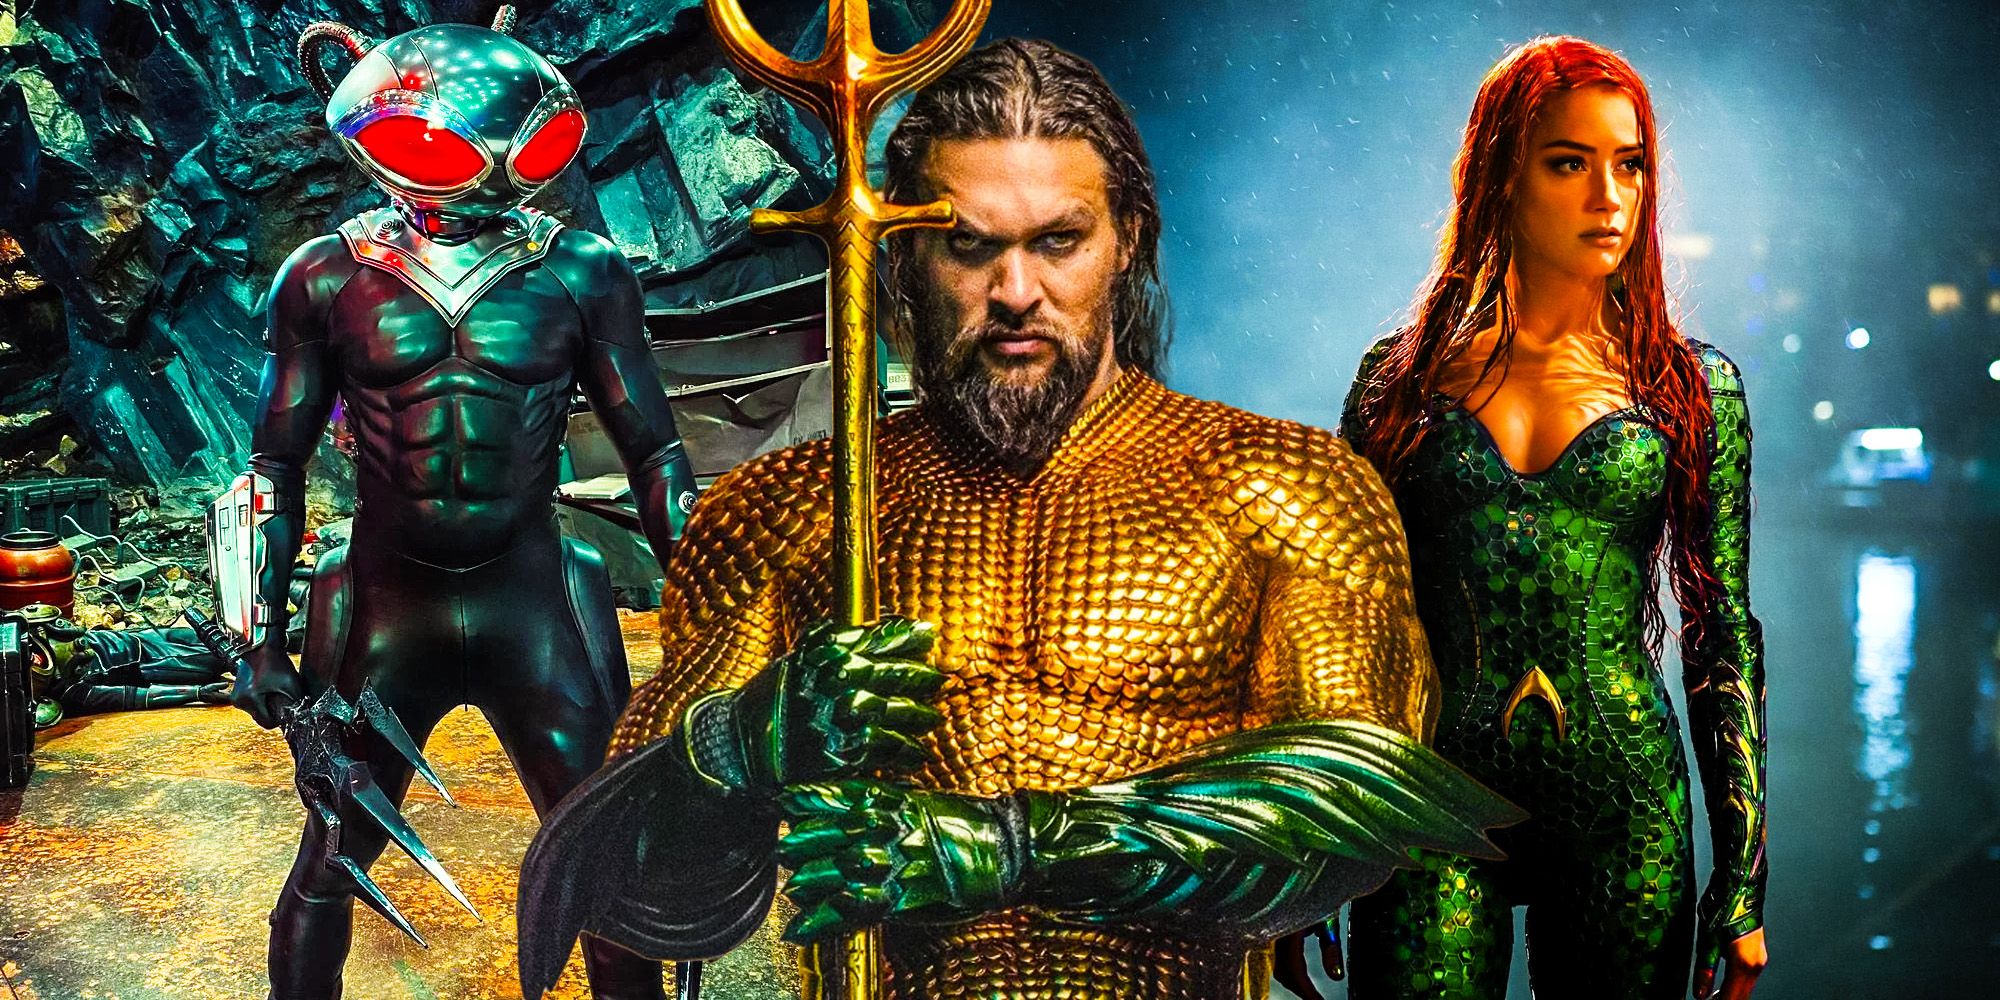 Aquaman & The Lost Kingdom: Cast, Story, & Everything We Know